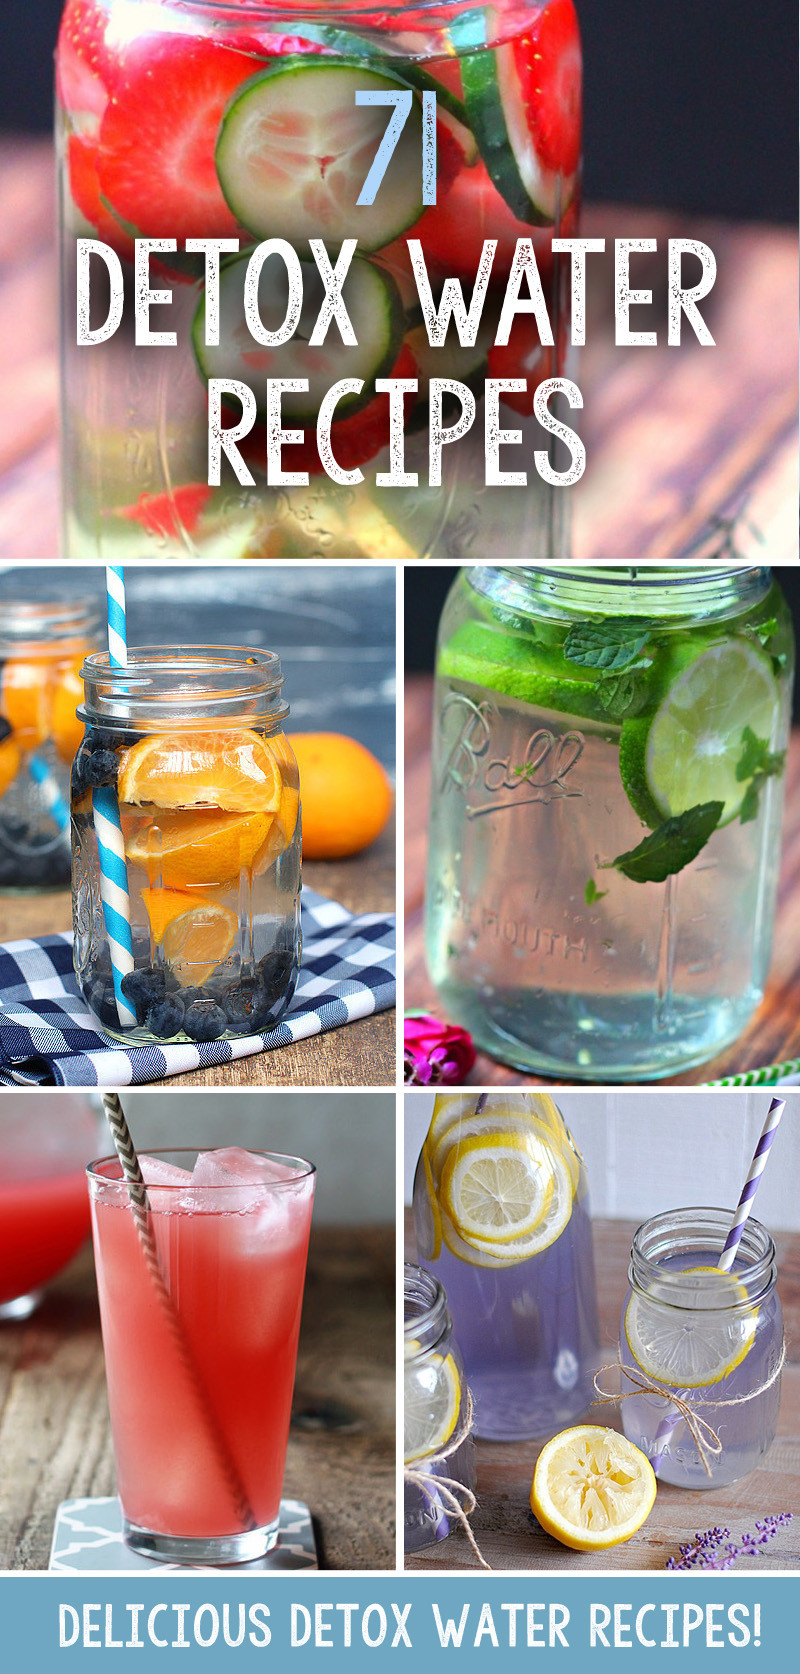 Water Detox Recipes For Weight Loss
 71 Delicious Detox Water Recipes To Help You Lose Weight Fast